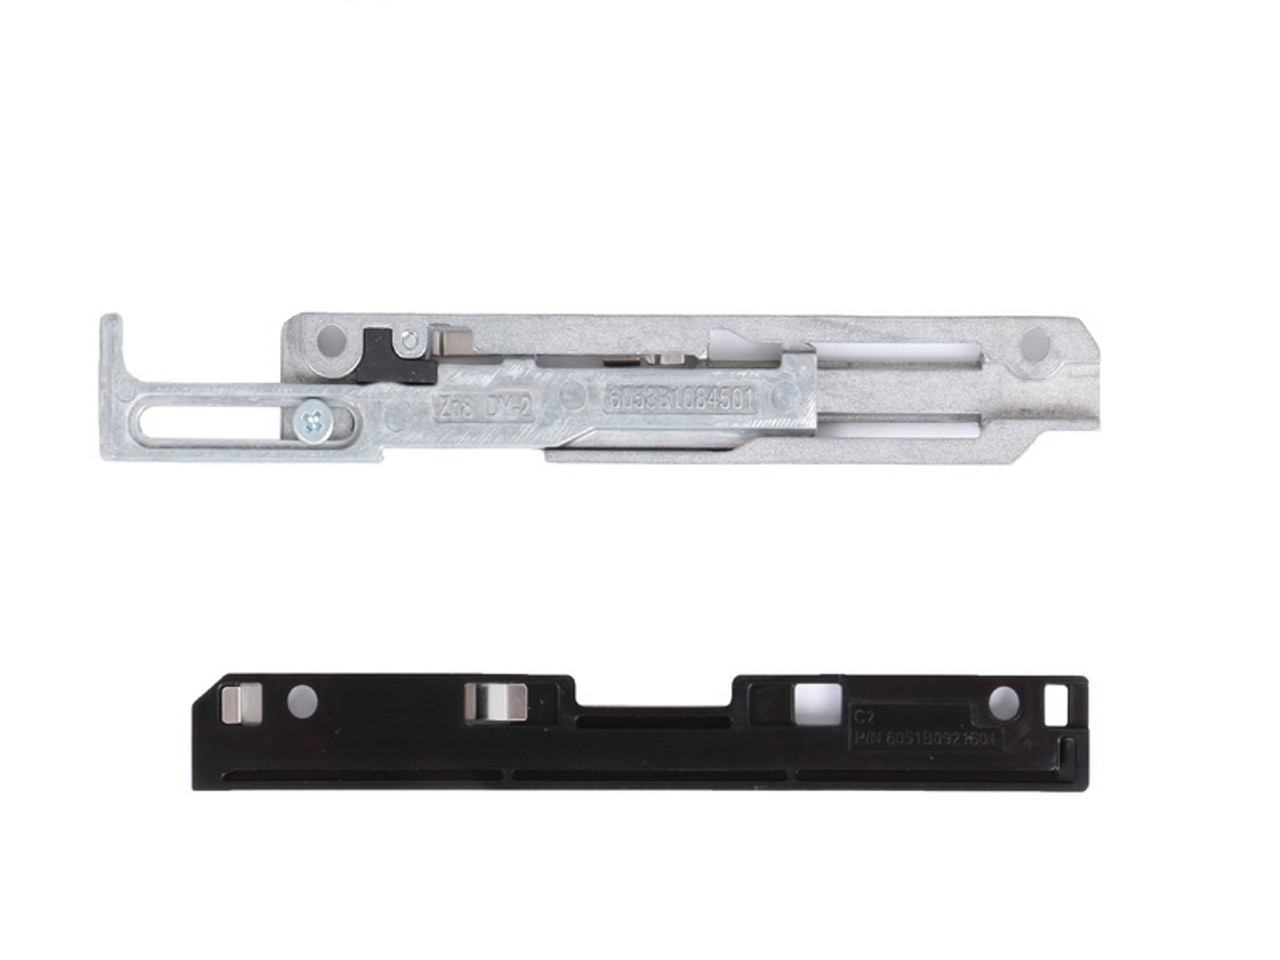 DELL 7K18H Hard Drive Bracket 2.5 Inch Small Form Factor Sff For Dell Poweredge Fx2s / Fd332 Tray / Caddy